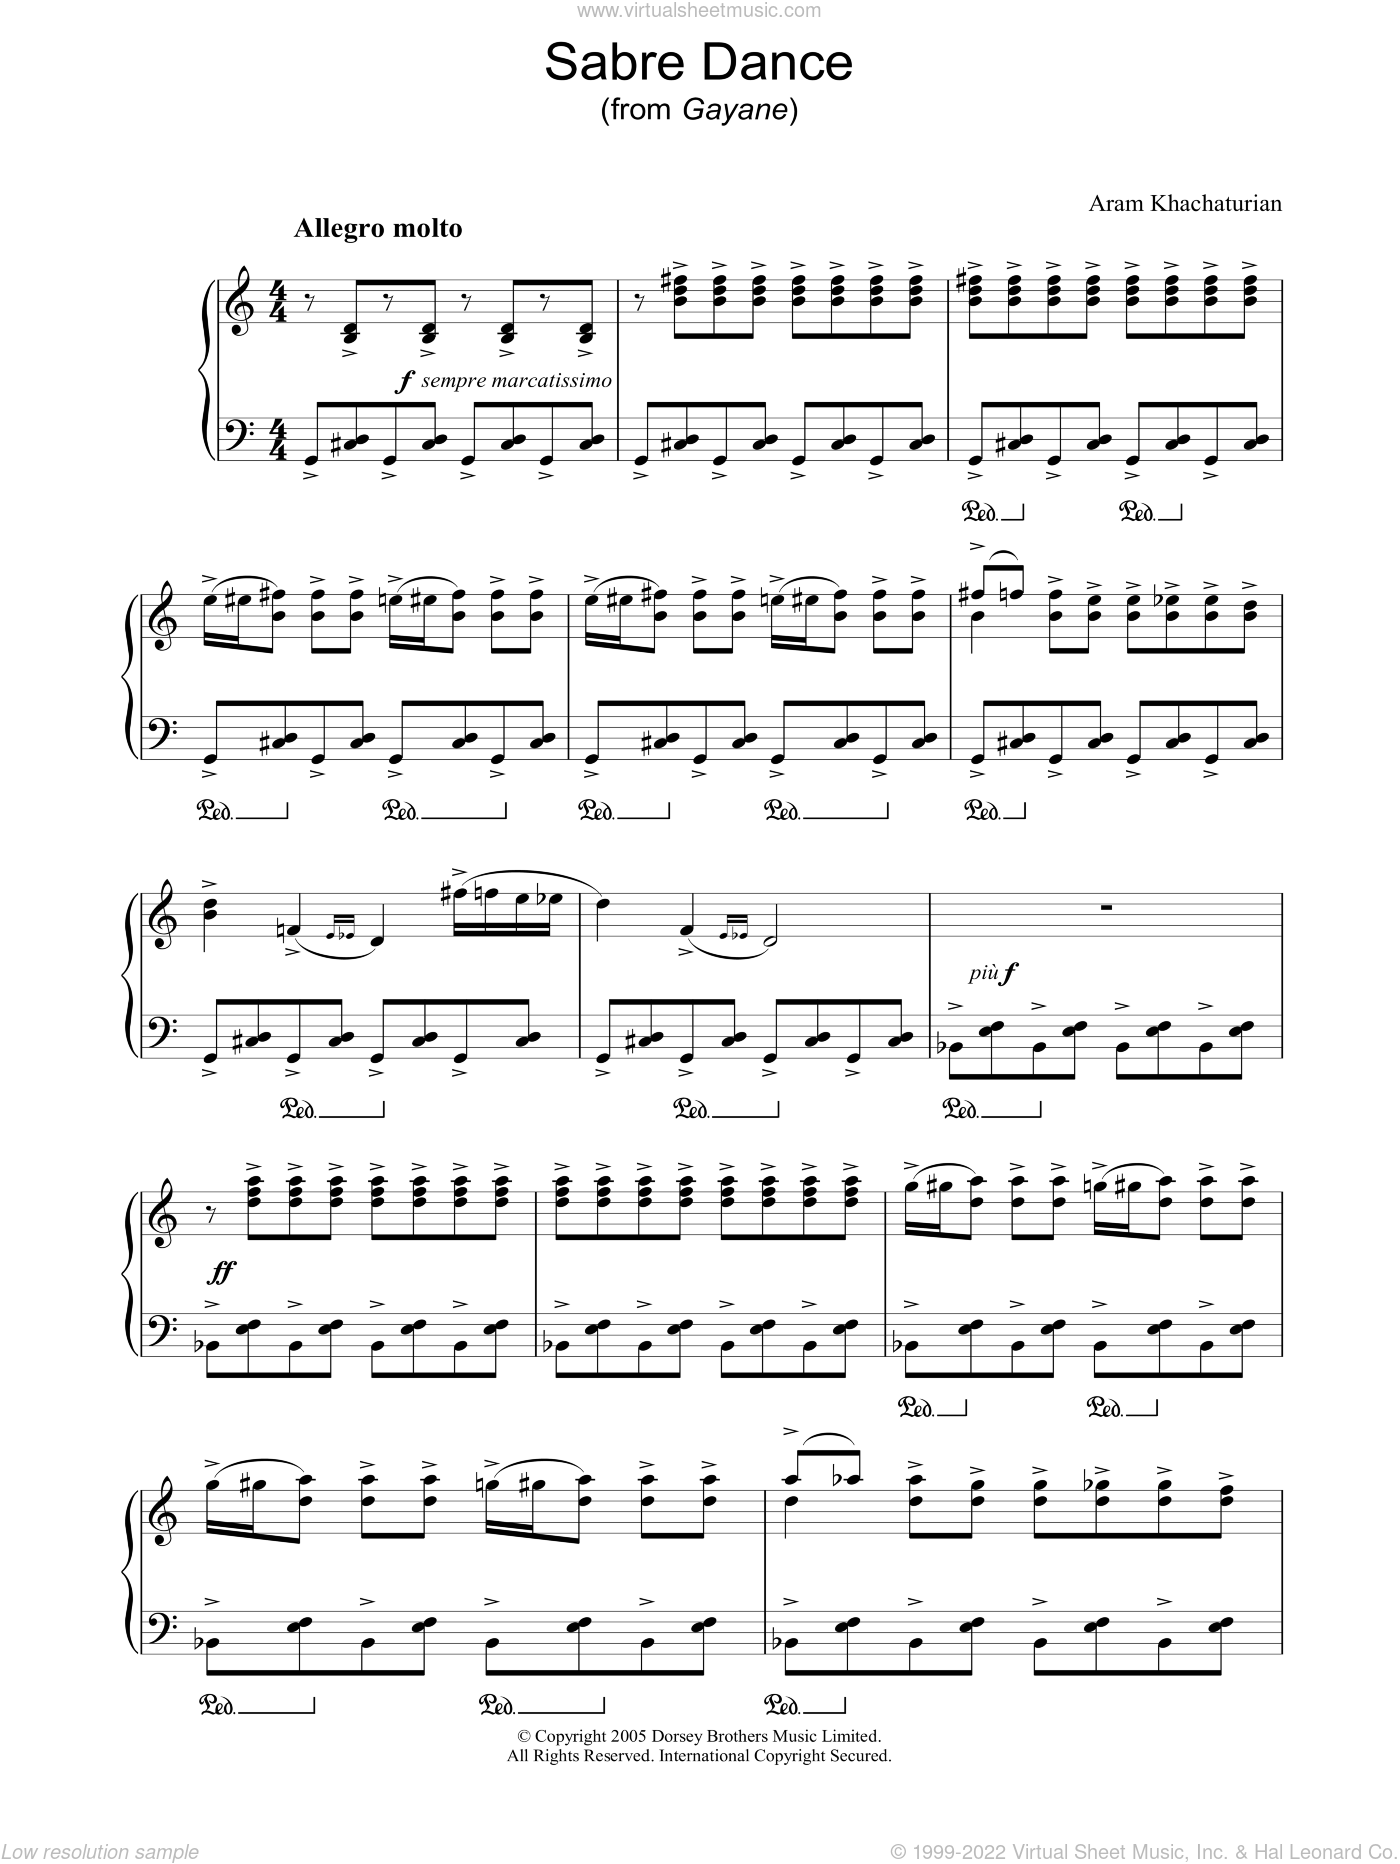 Khachaturian - Sabre Dance sheet music for piano solo v2